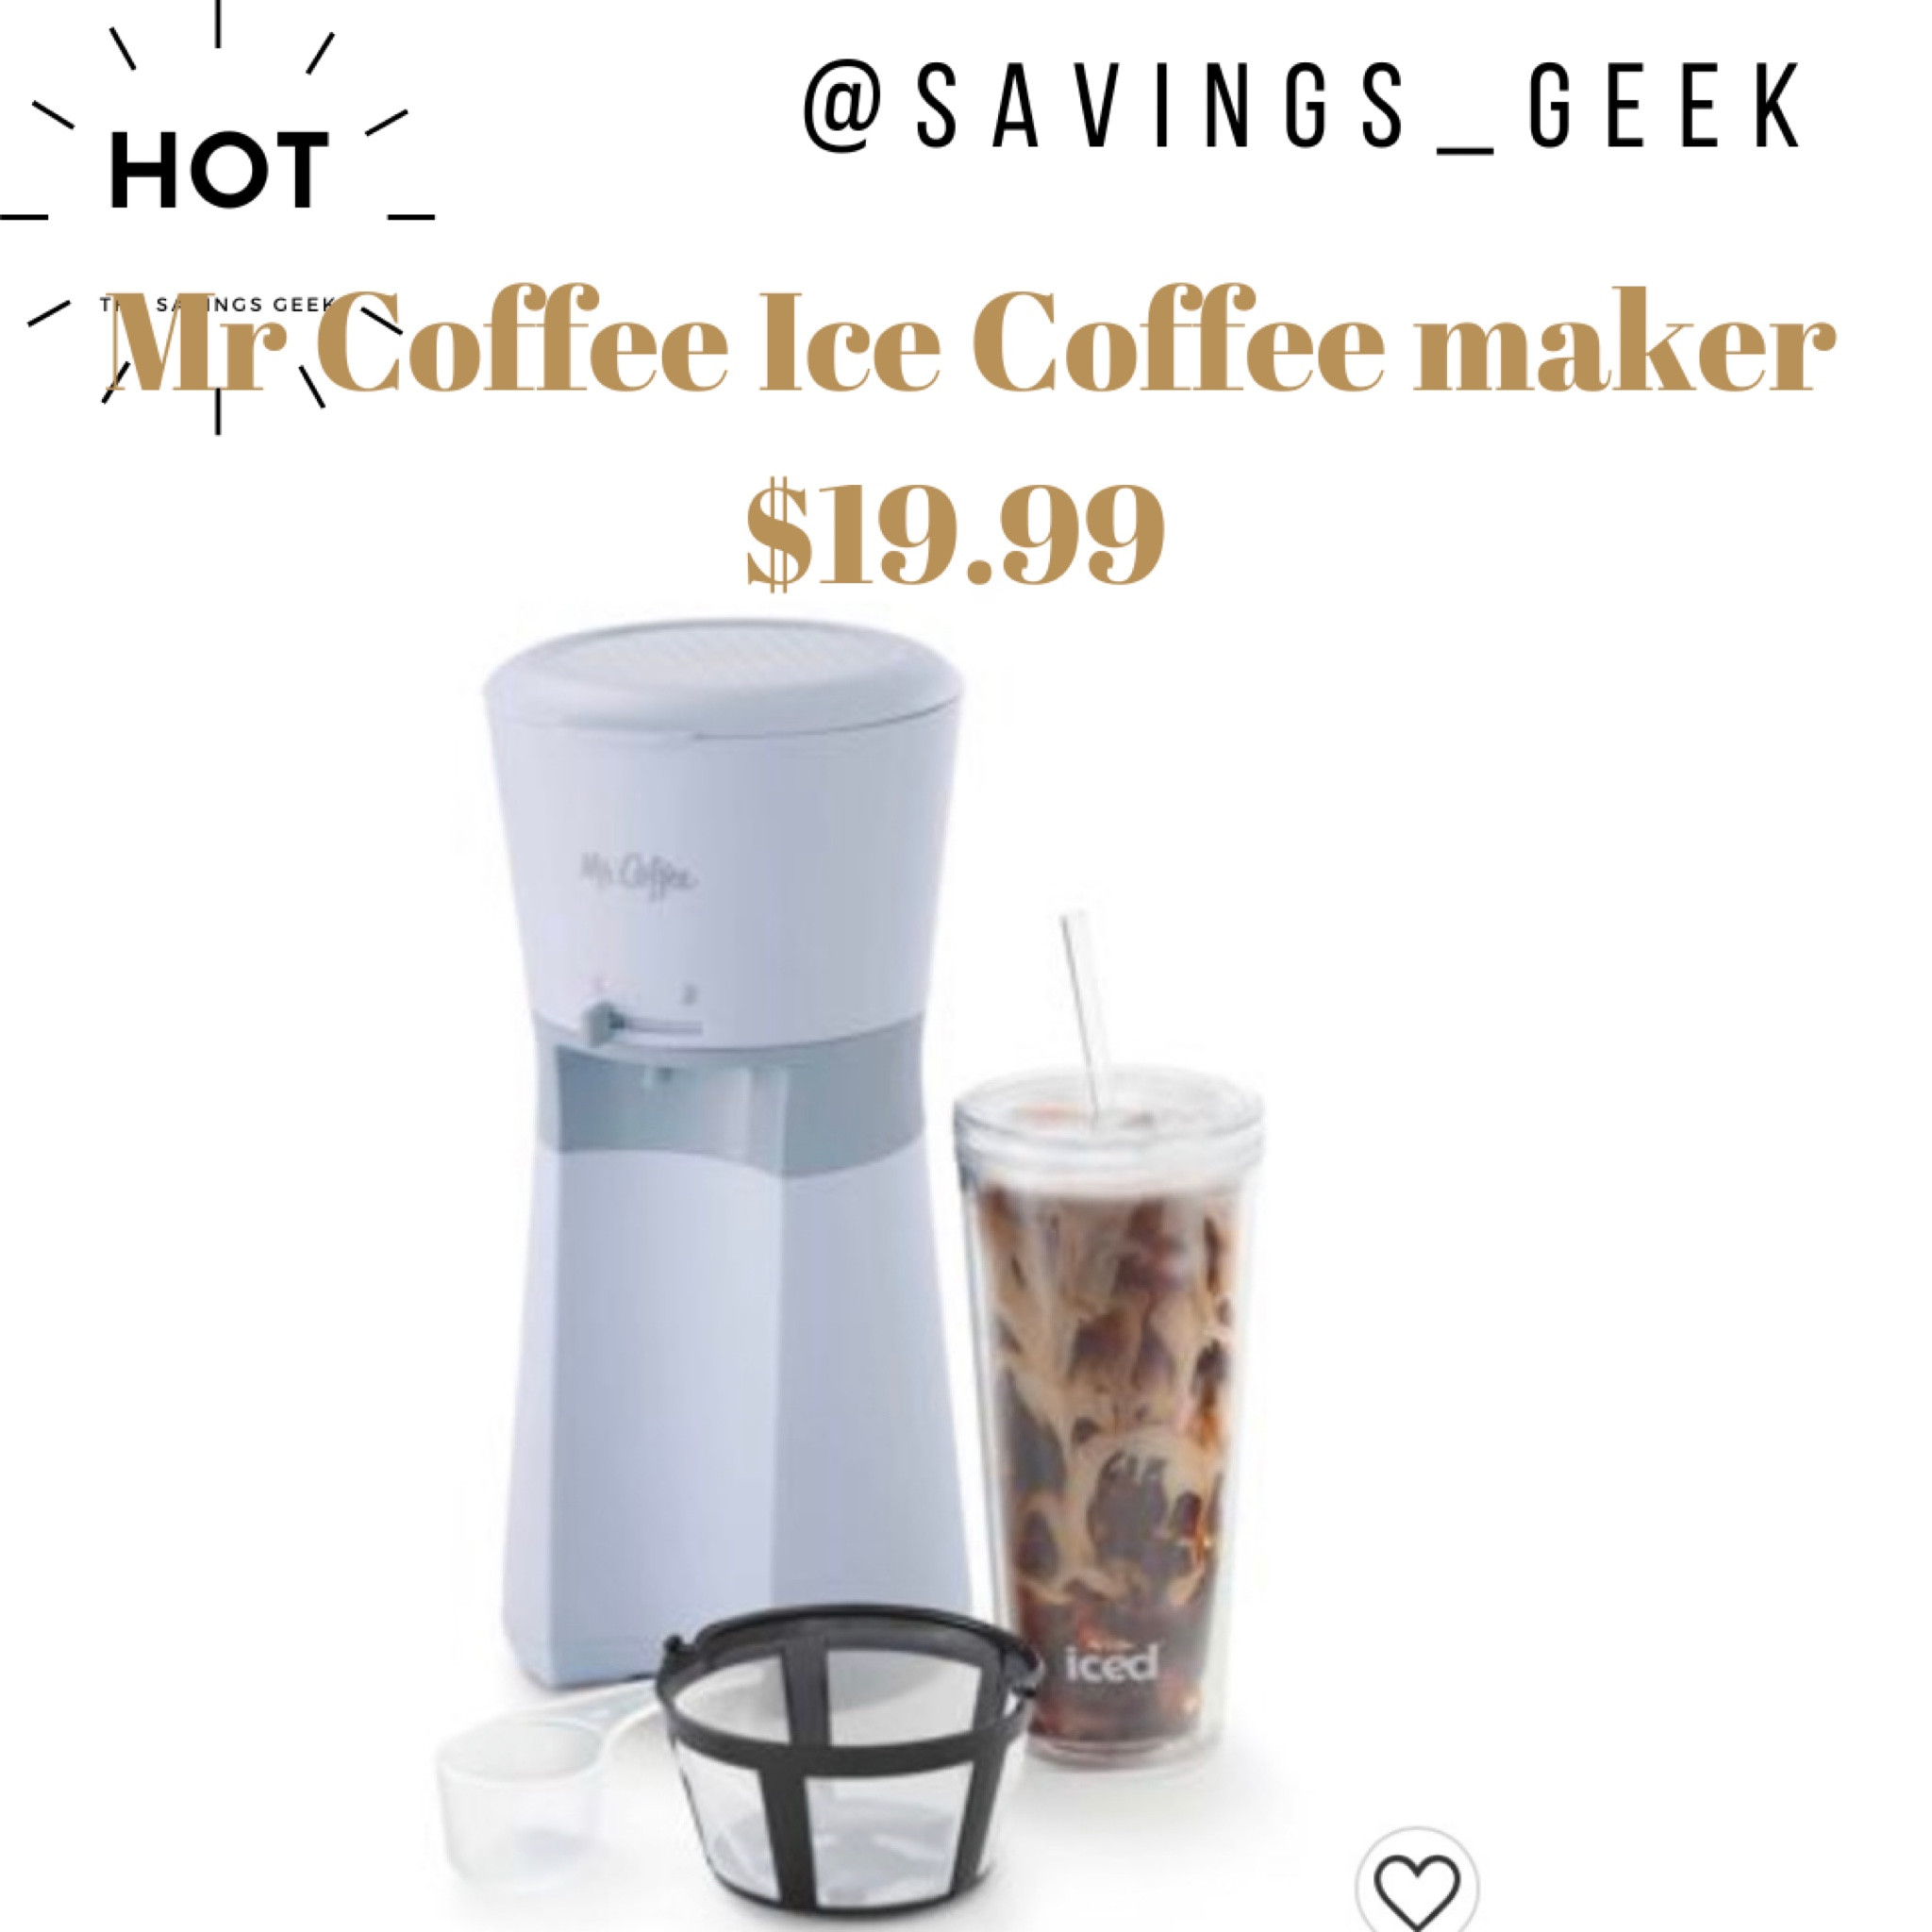 Mr. Coffee Iced Coffee Maker with Reusable Tumbler and Coffee Filter